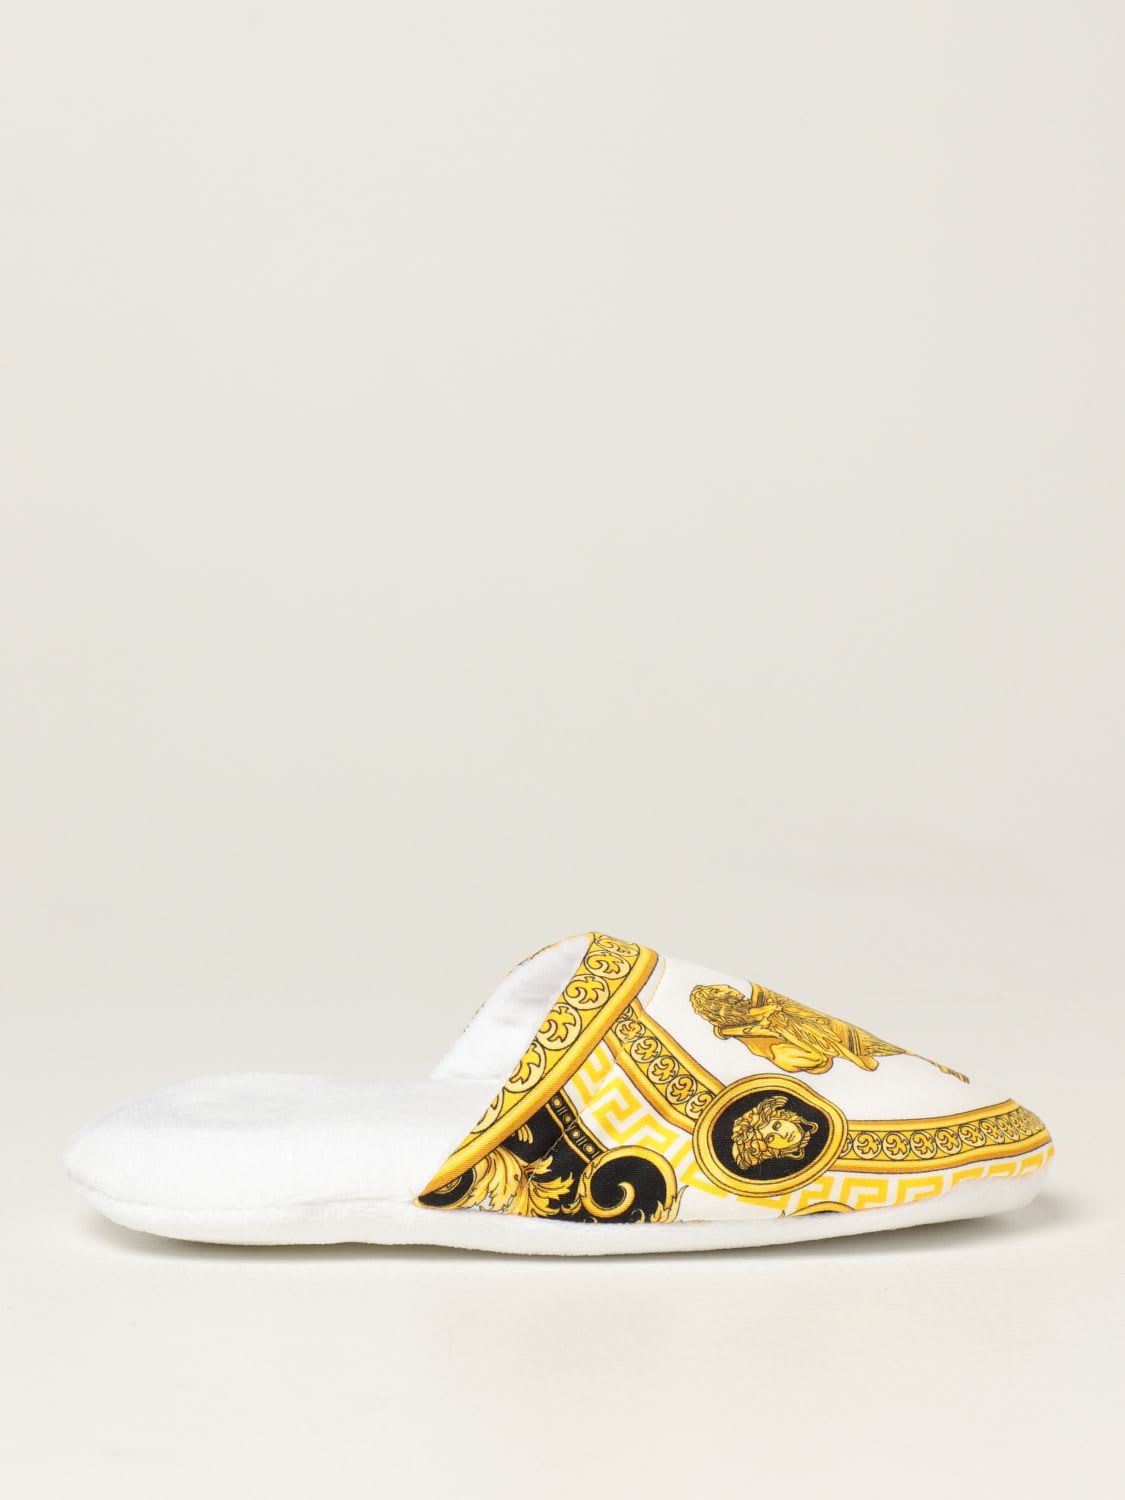 Buy Versace Home Flat Shoes Versace Home Slipper In Cotton With La Coupe Des Dieux Print online, shop Versace shoes with free shipping